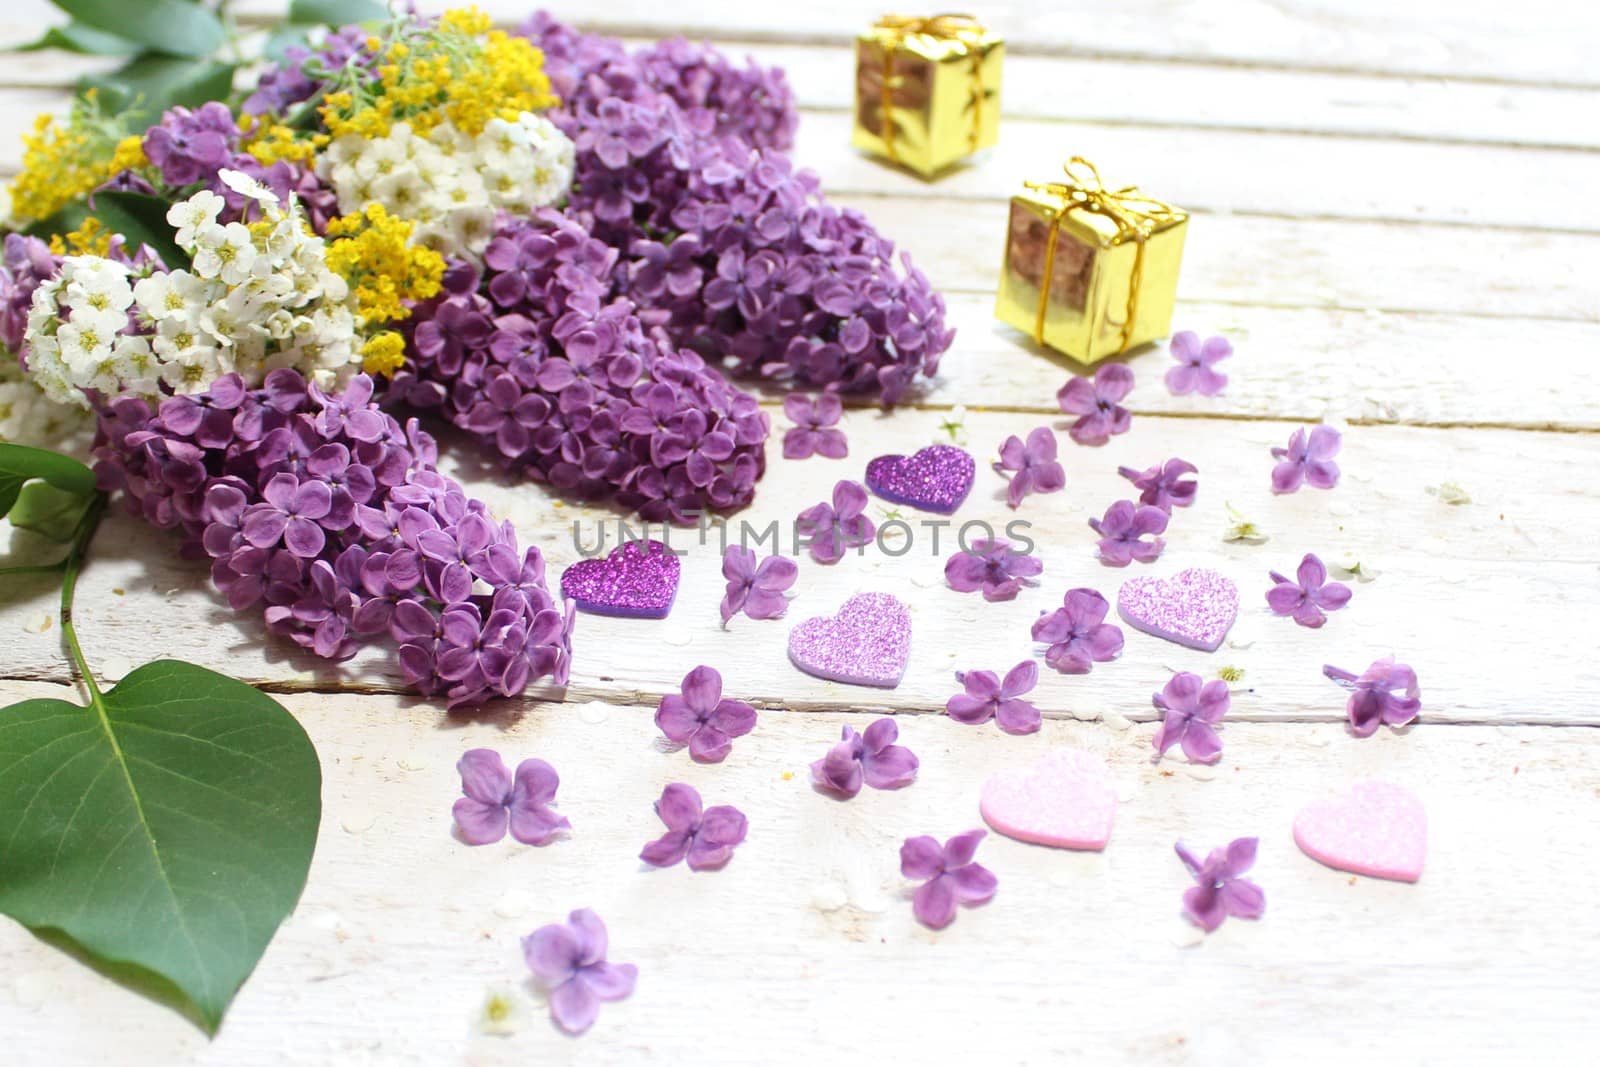 The picture shows lilac, sweet alison, snowberry, hearts and gifts.